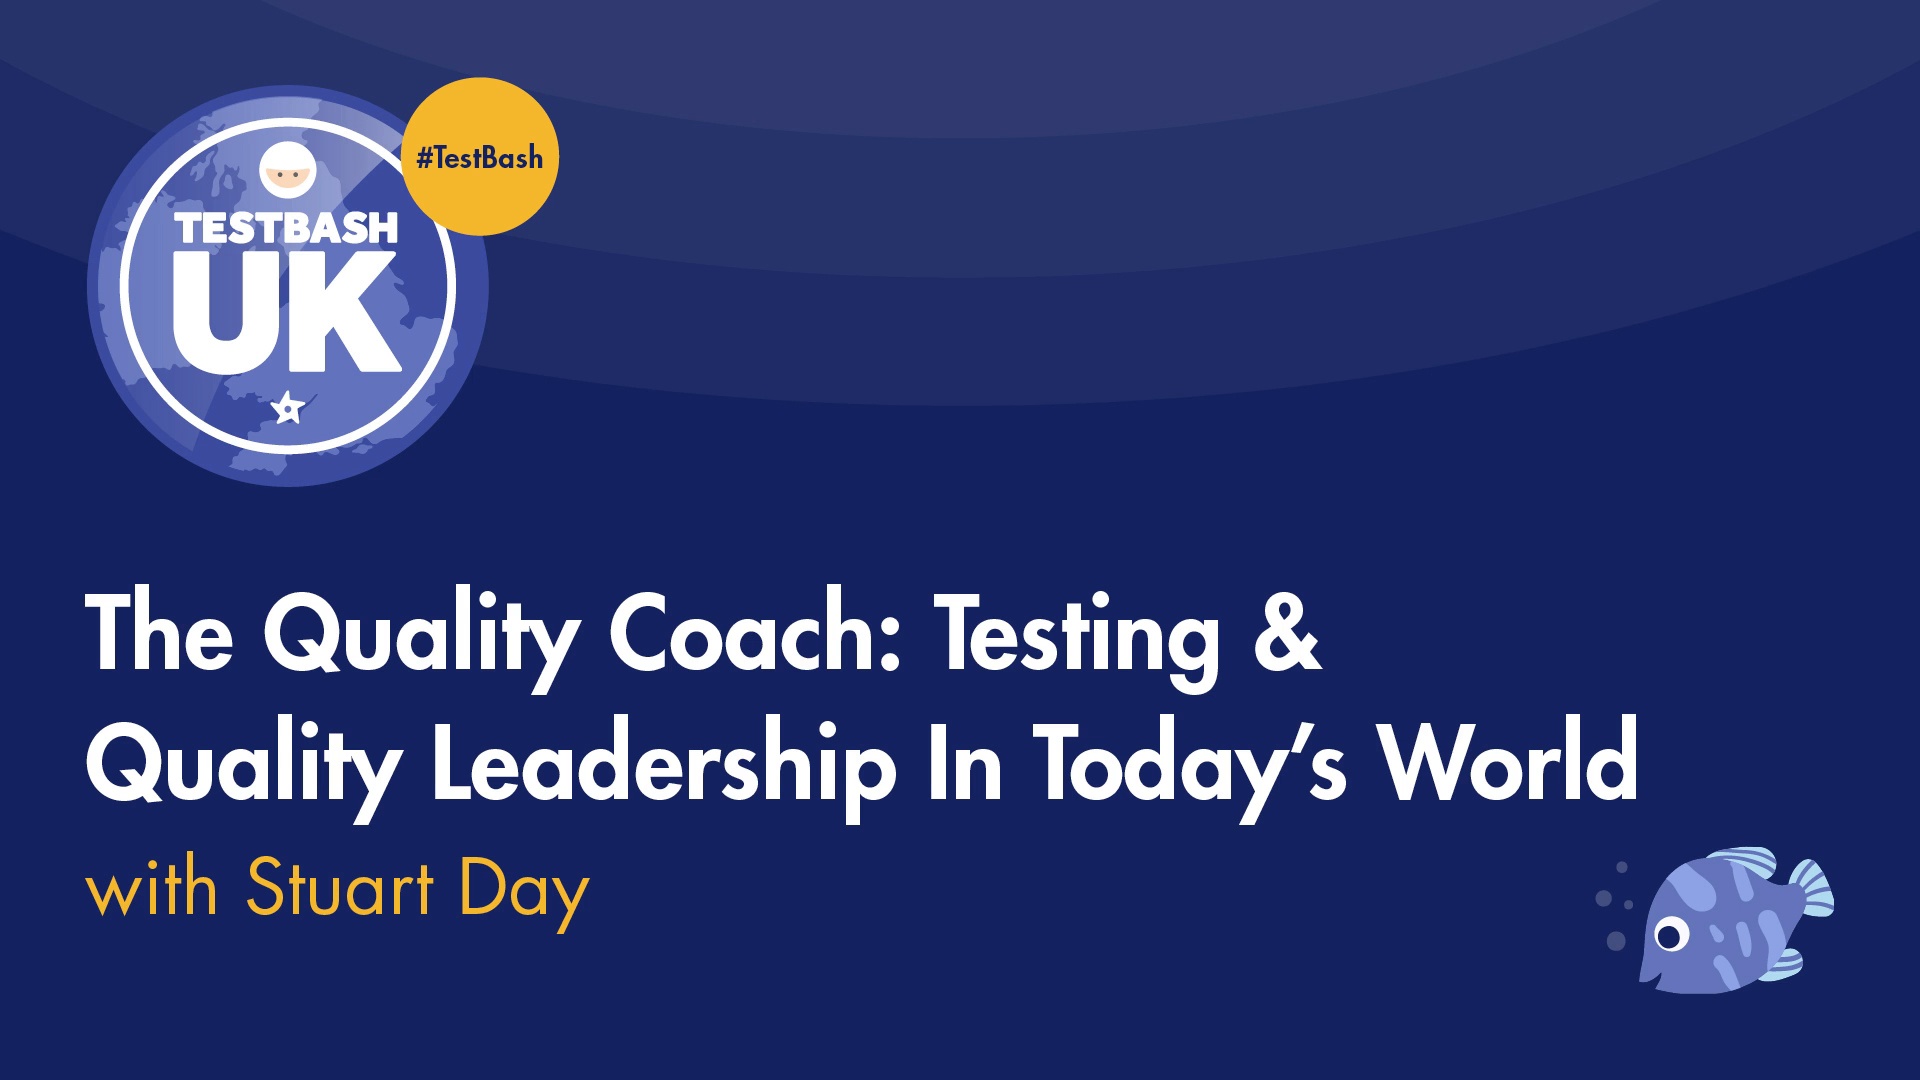 The Quality Coach: Testing & Quality Leadership In Today's World image